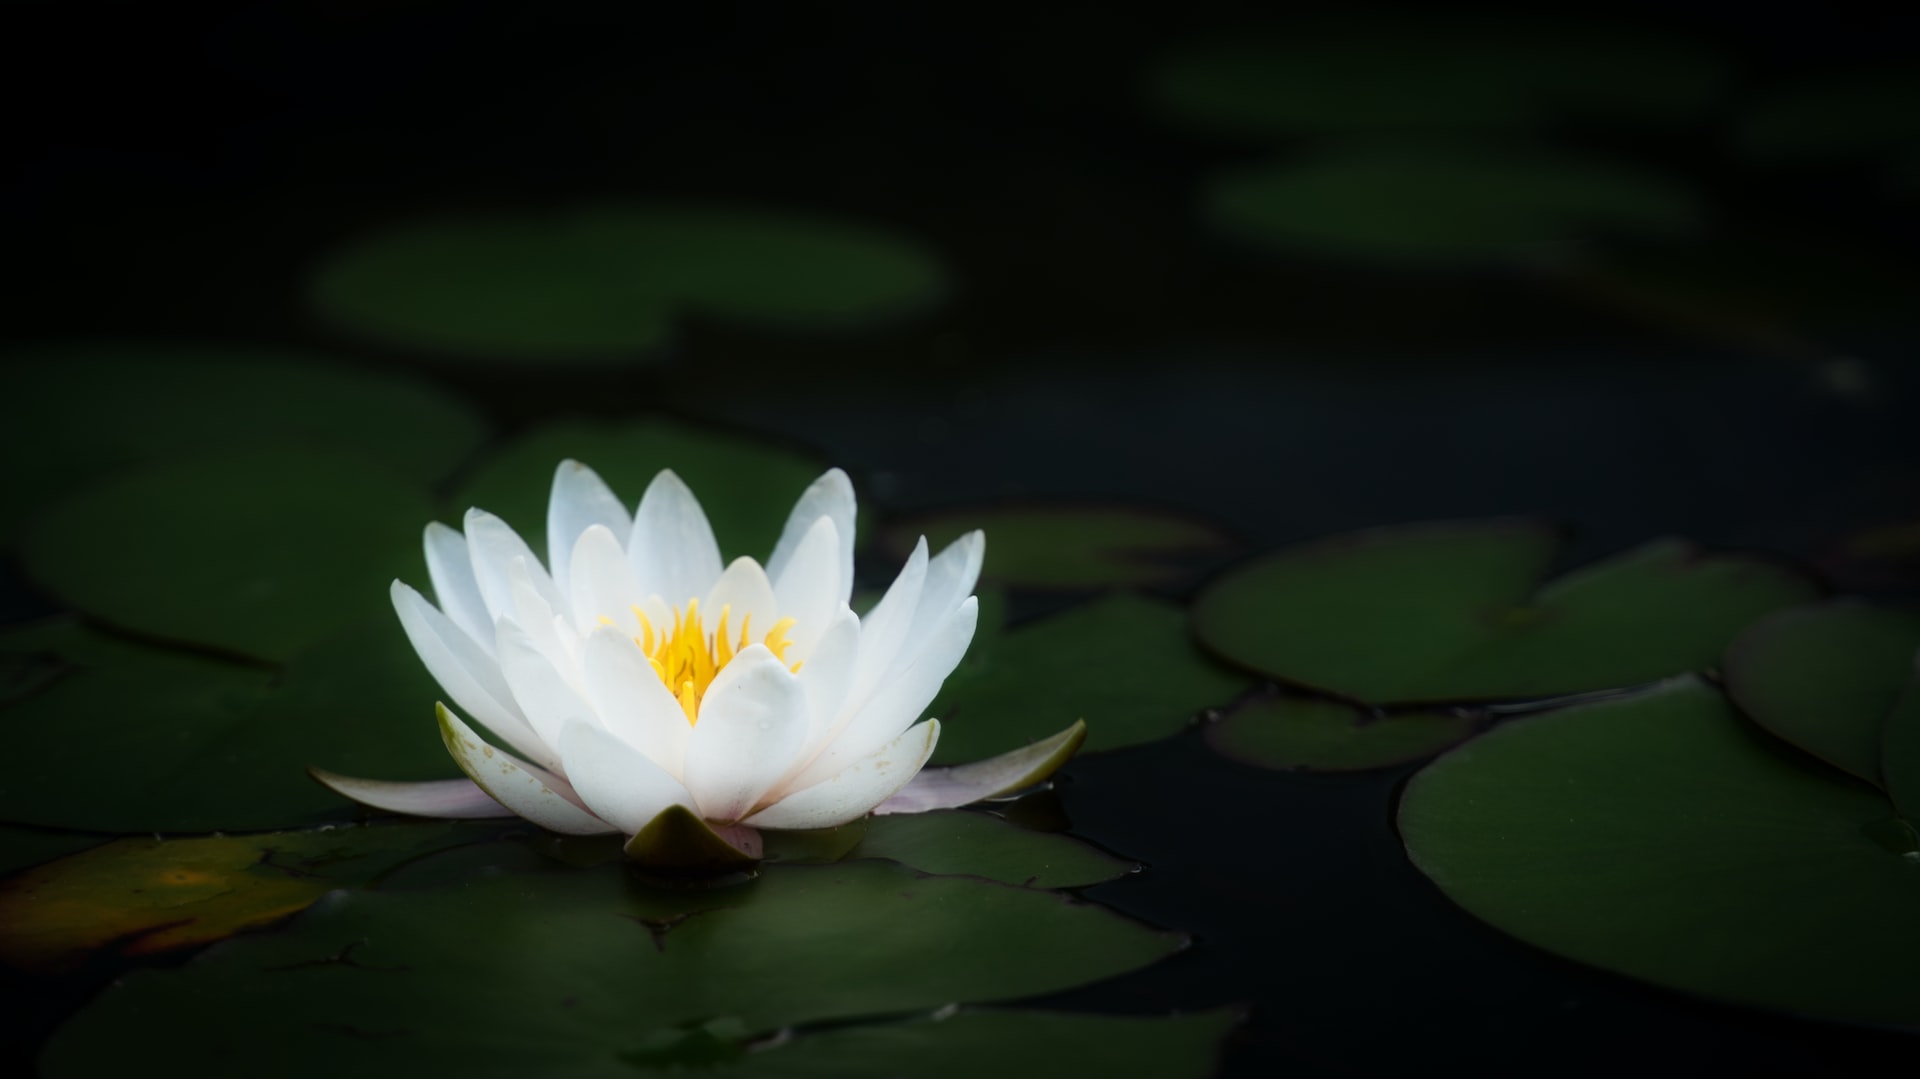 <p>Technion scientists receive a prestigious research grant of $1.5 million to develop clean anti-fungal technology inspired by the natural properties of the lotus plant</p>
